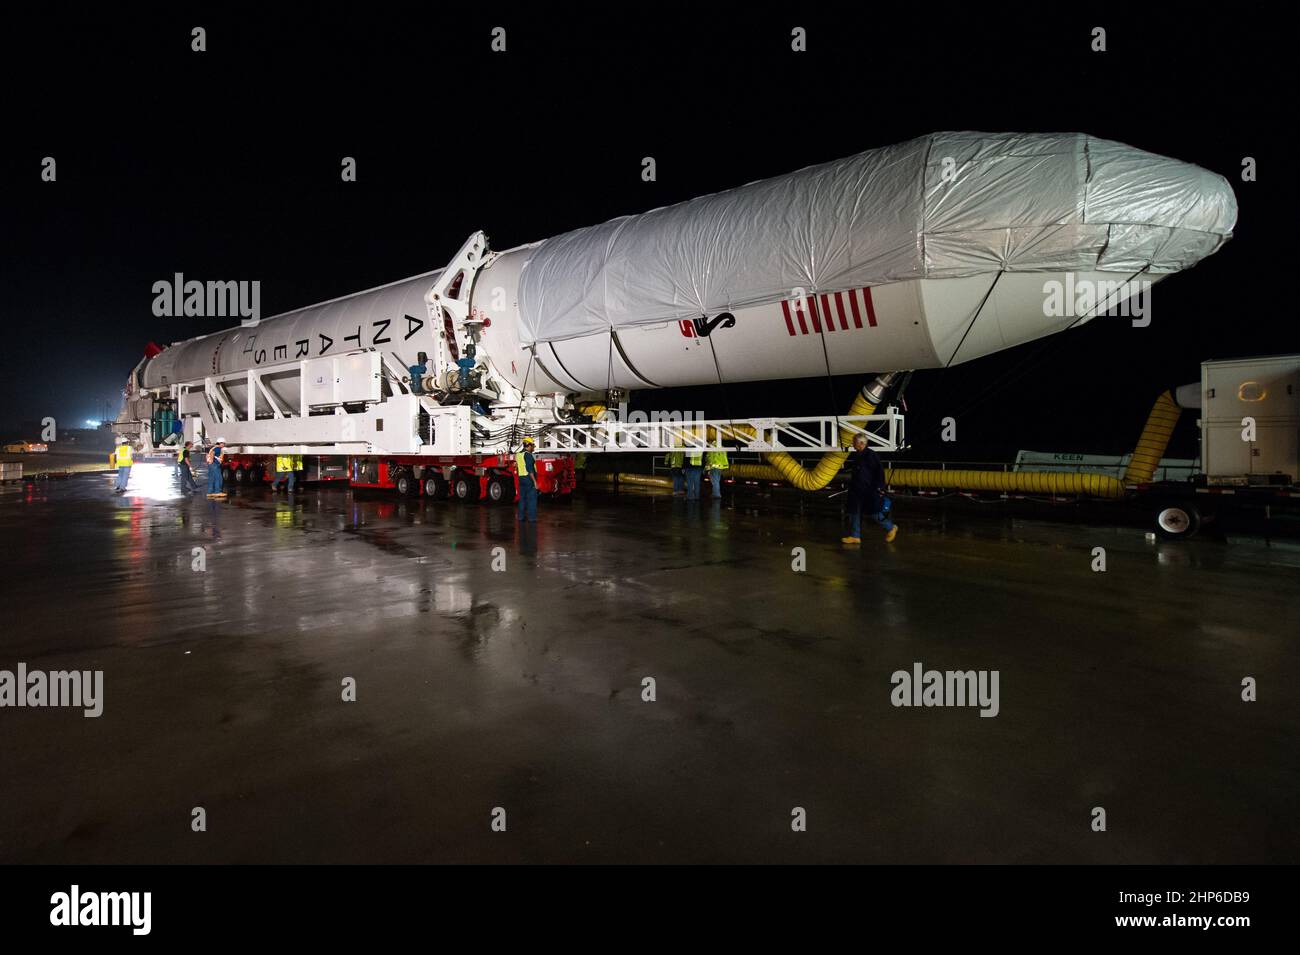 The Orbital Sciences Corporation Antares rocket, with the Cygnus spacecraft onboard, is rolled out of the Horizontal Integration Facility (HIF) to make the approximately half-mile journey to launch Pad-0A, Thursday, July 10, 2014, at NASA's Wallops Flight Facility in Virginia. Stock Photo